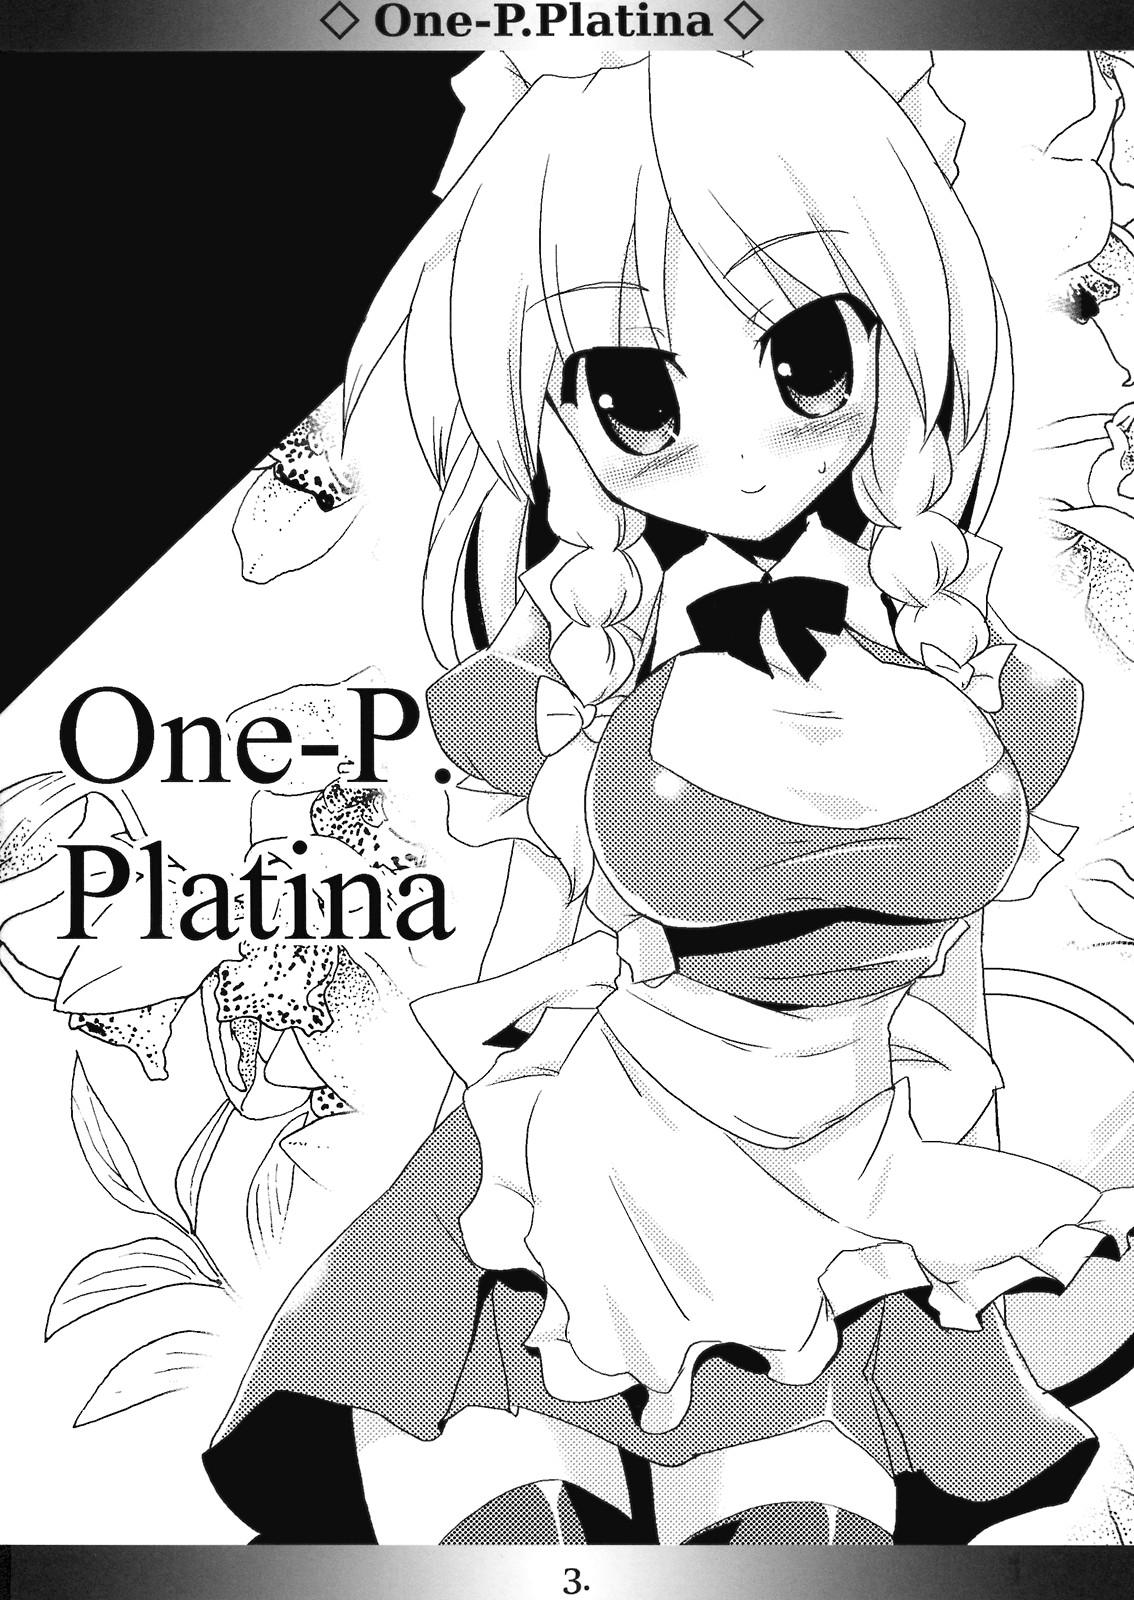 Trap One-P.Platina - Touhou project Porn Star - Page 3